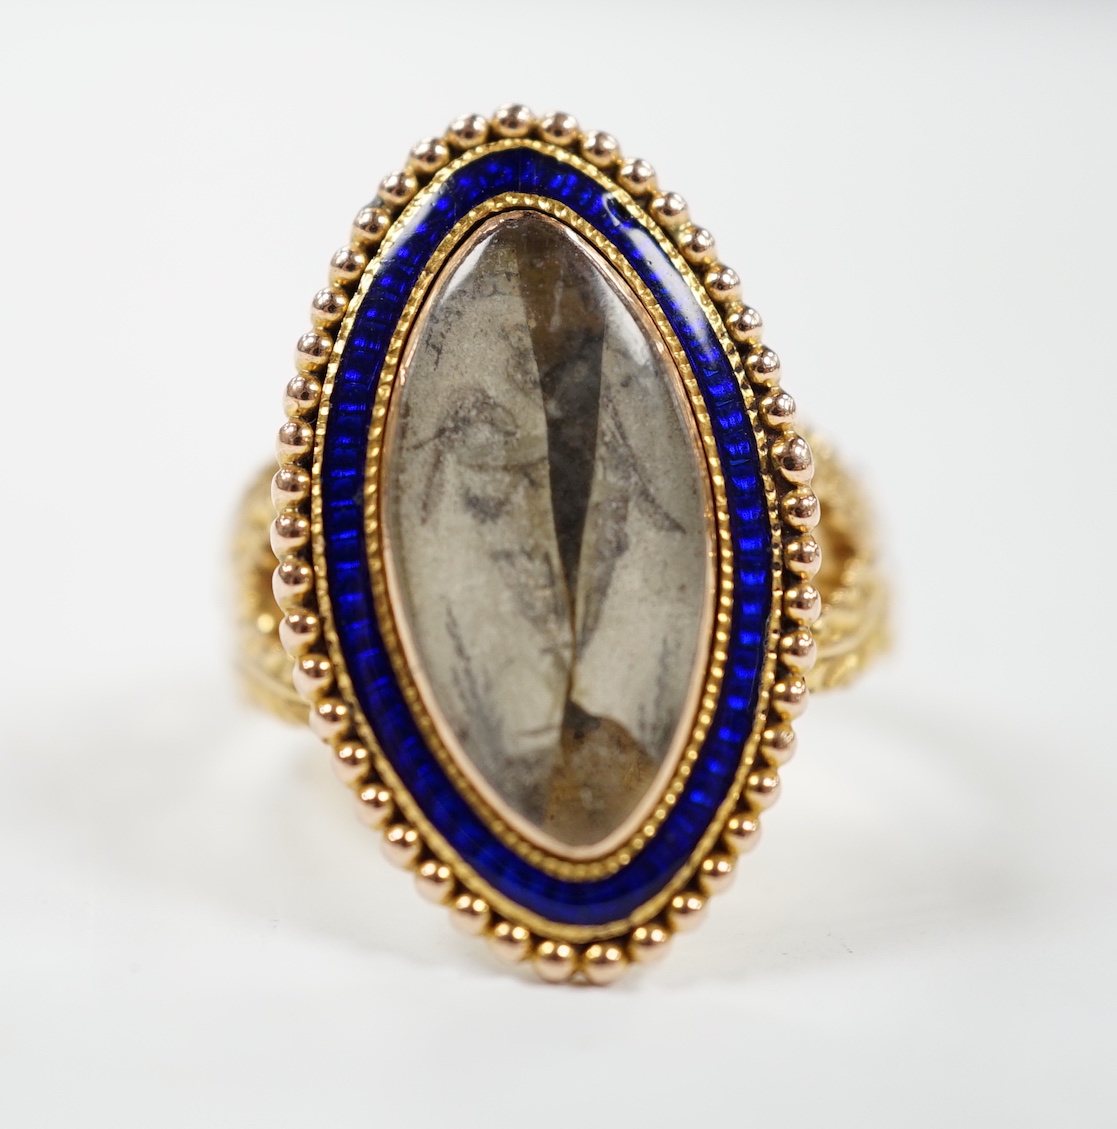 A 19th century 15ct and blue enamel set navette shaped mourning ring, with damaged inset ivory panel, size O, gross weight 5.5 grams. Submission reference Q8ZGC6ZR